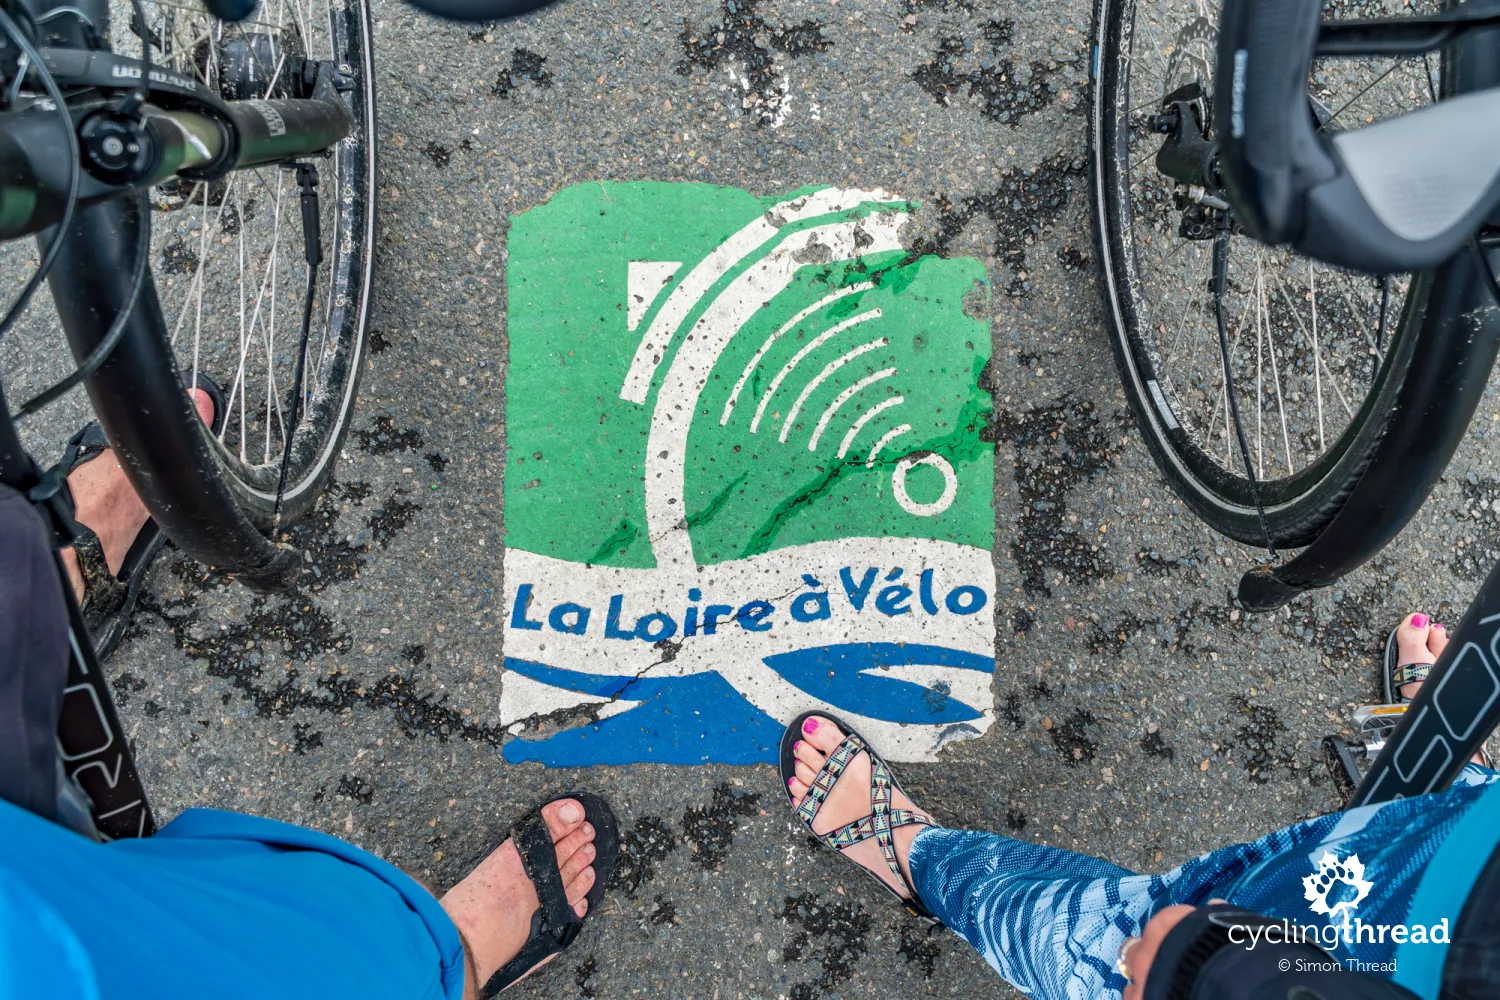 Loire cycling route sign on asphalt